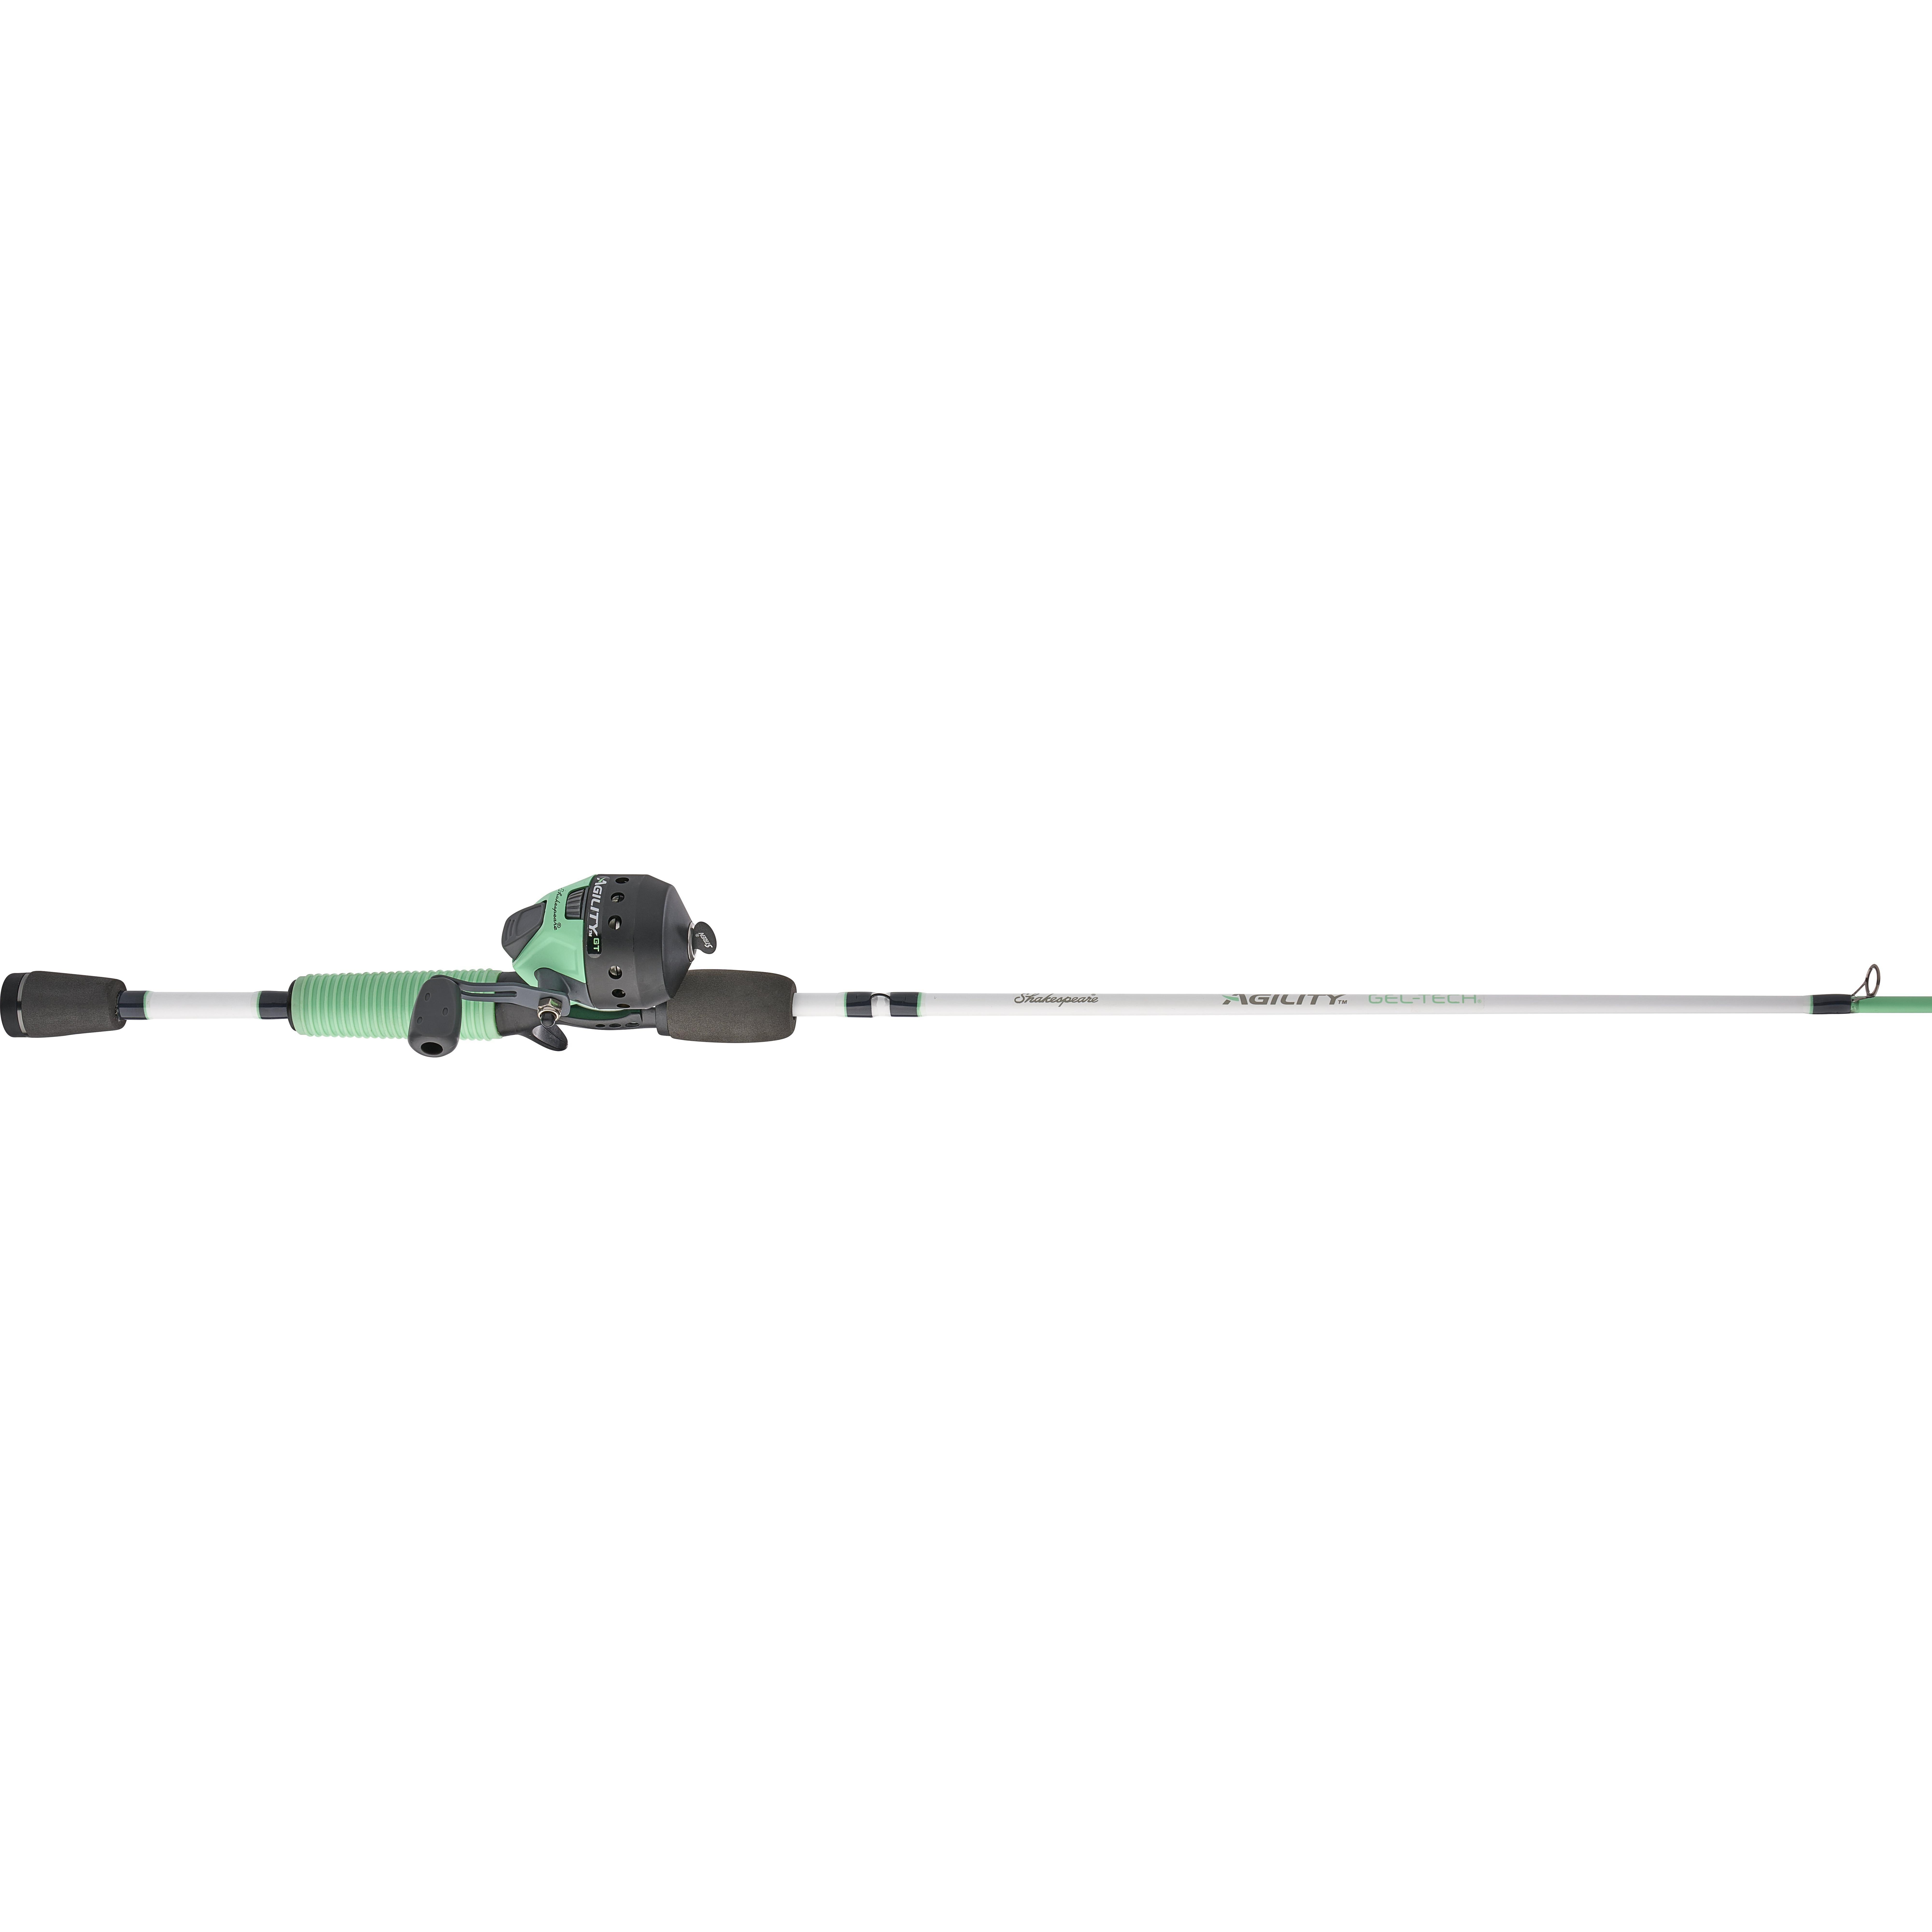 https://cs1.0ps.us/original/opplanet-shakespeare-agility-gel-tech-spincast-combo-3-0-1-right-6-6ft-rod-length-medium-power-fast-action-2-pieces-rod-mint-aggt6-602mm-main